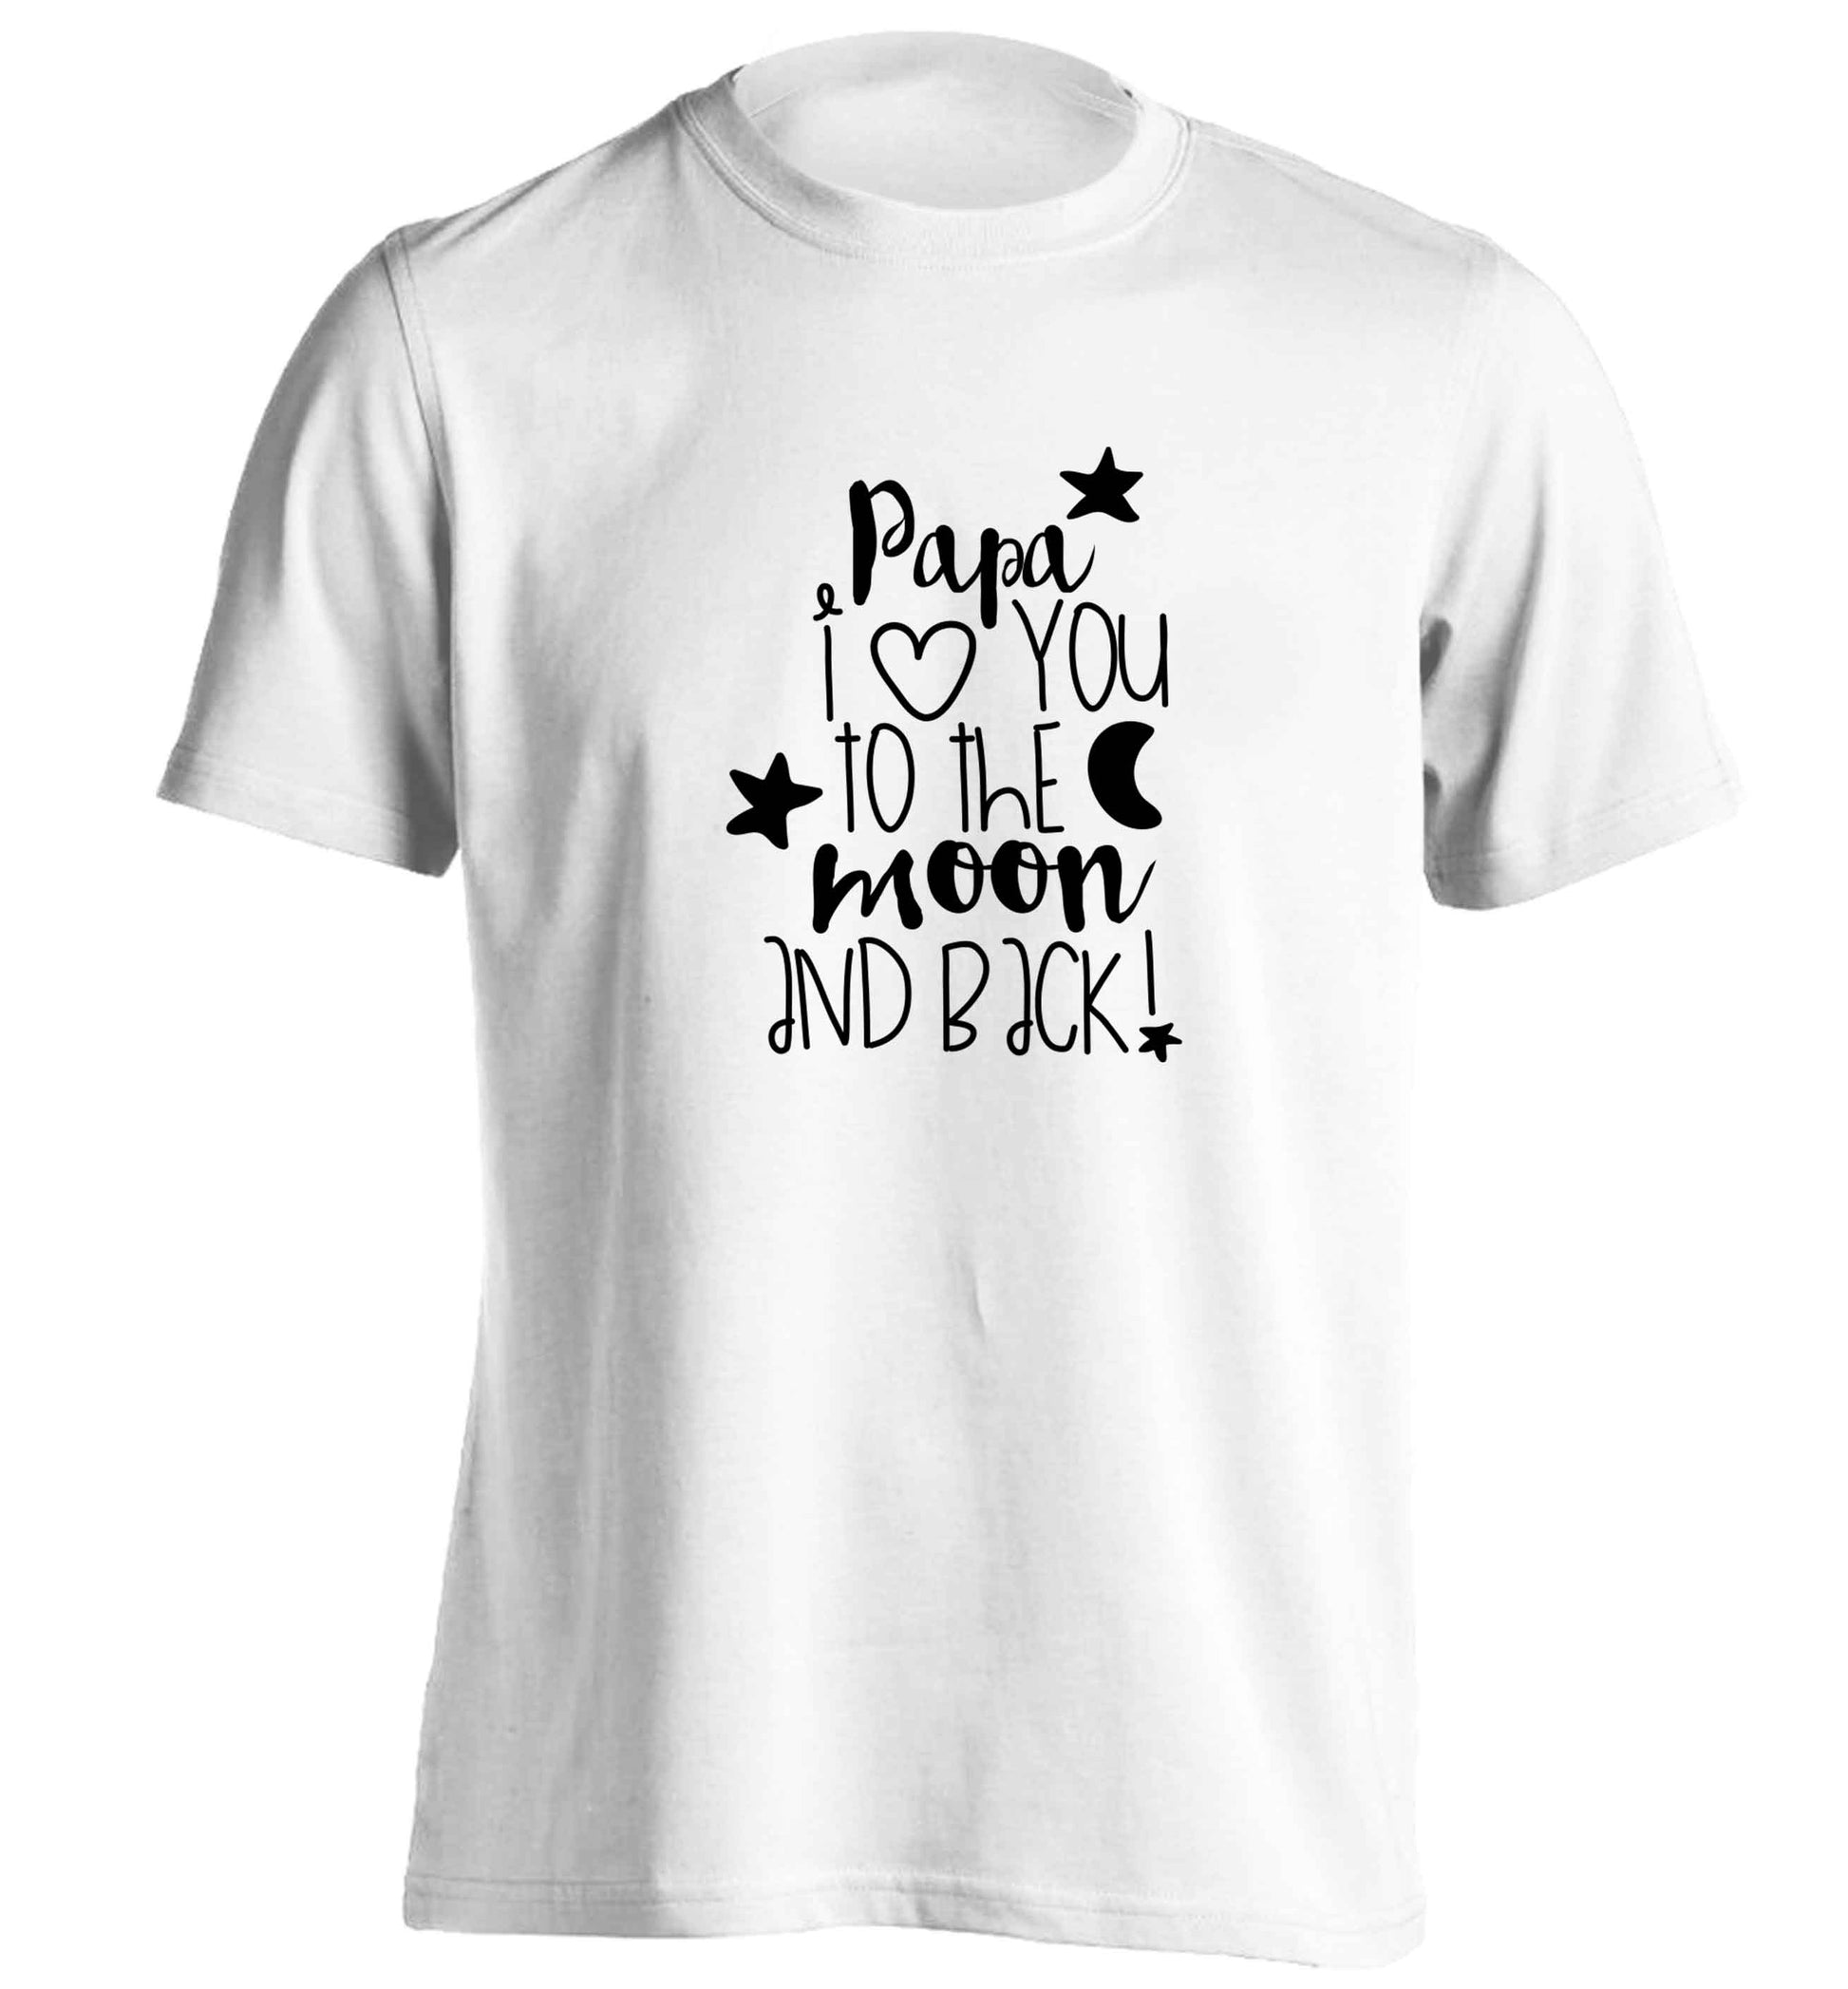 Papa I love you to the moon and back adults unisex white Tshirt 2XL